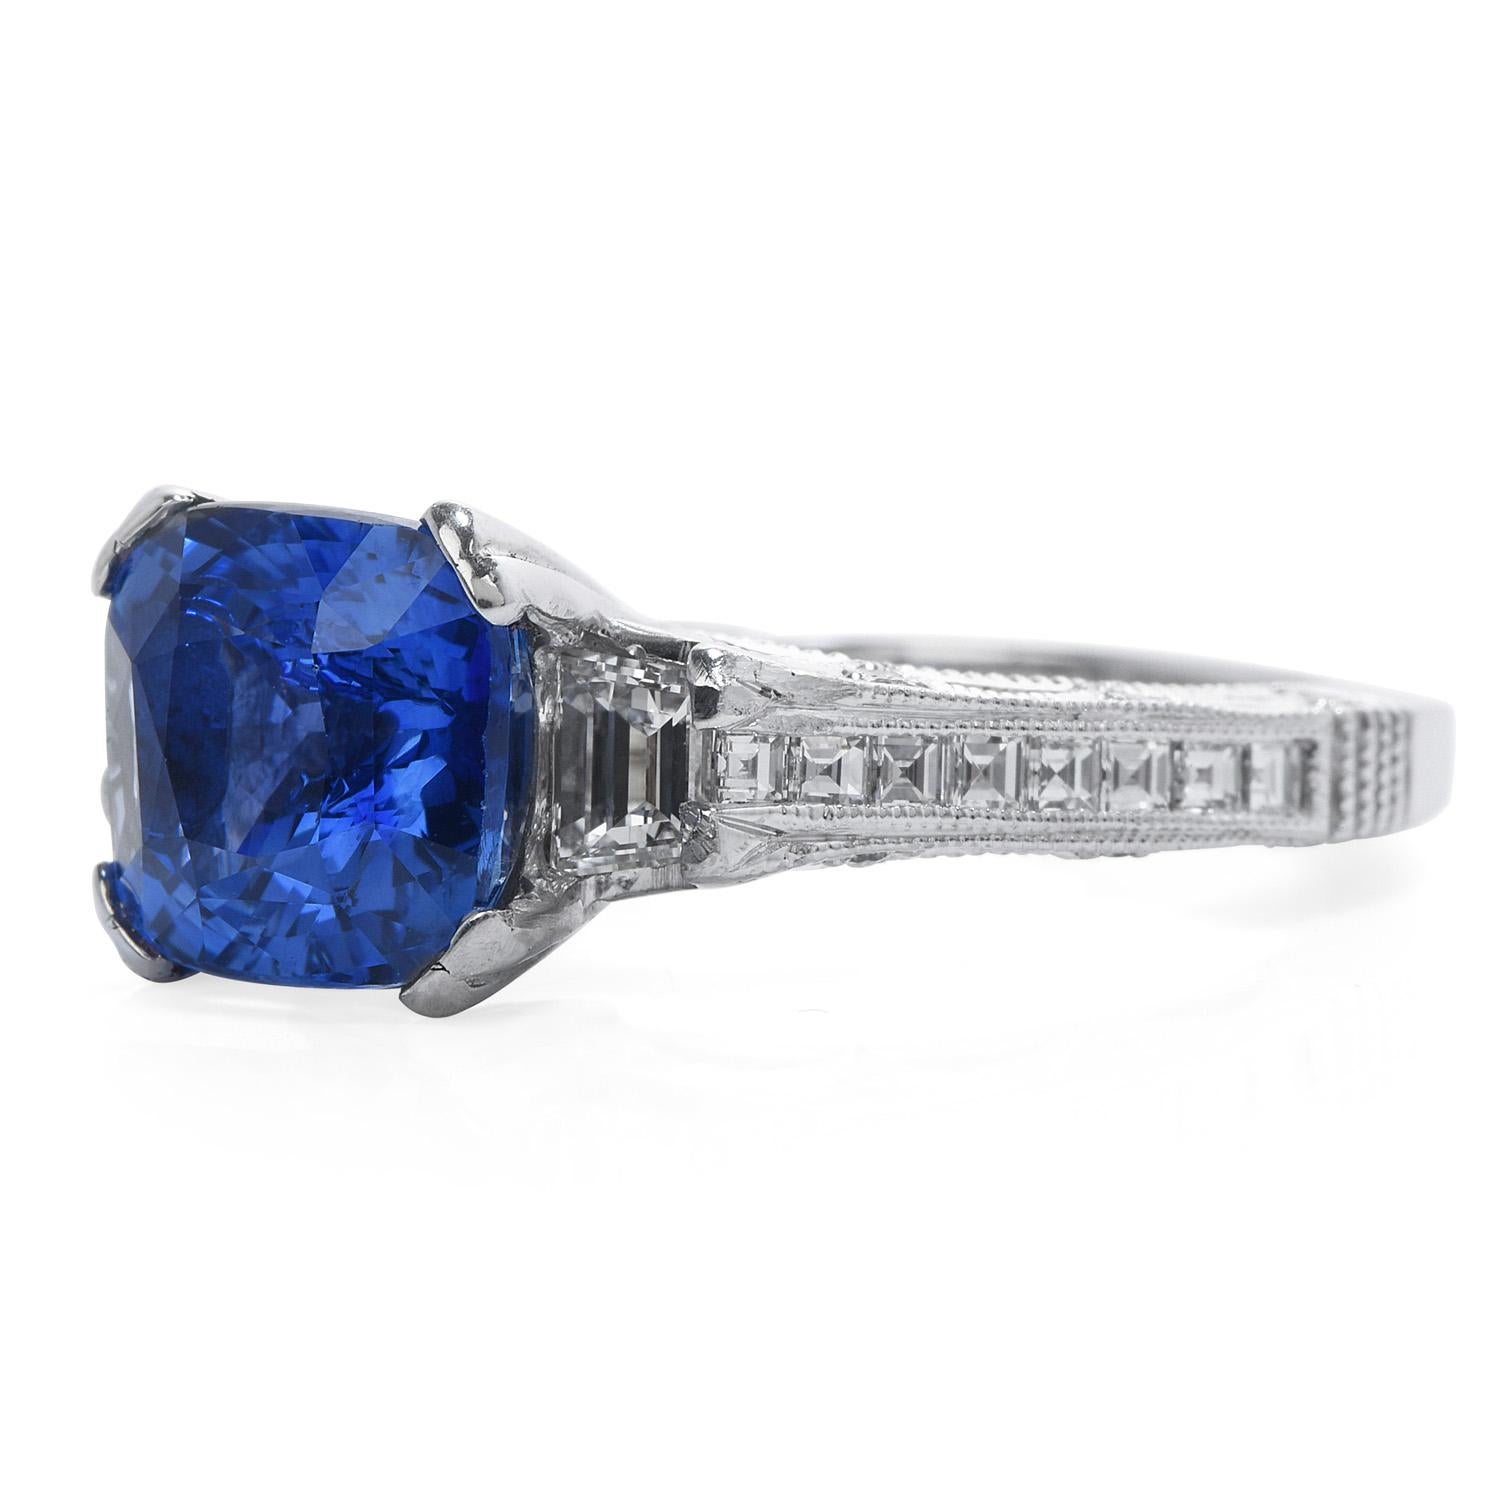 This exquisite Tacori piece is enhanced by the deep blue of the GIA Certified Ceylon Sapphire,

Crafted in solid heavy Platinum, the center is adorned by a GIA certified square cushion-cut Sri Lankan Ceylon Blue sapphire with heat treatment, Cushion